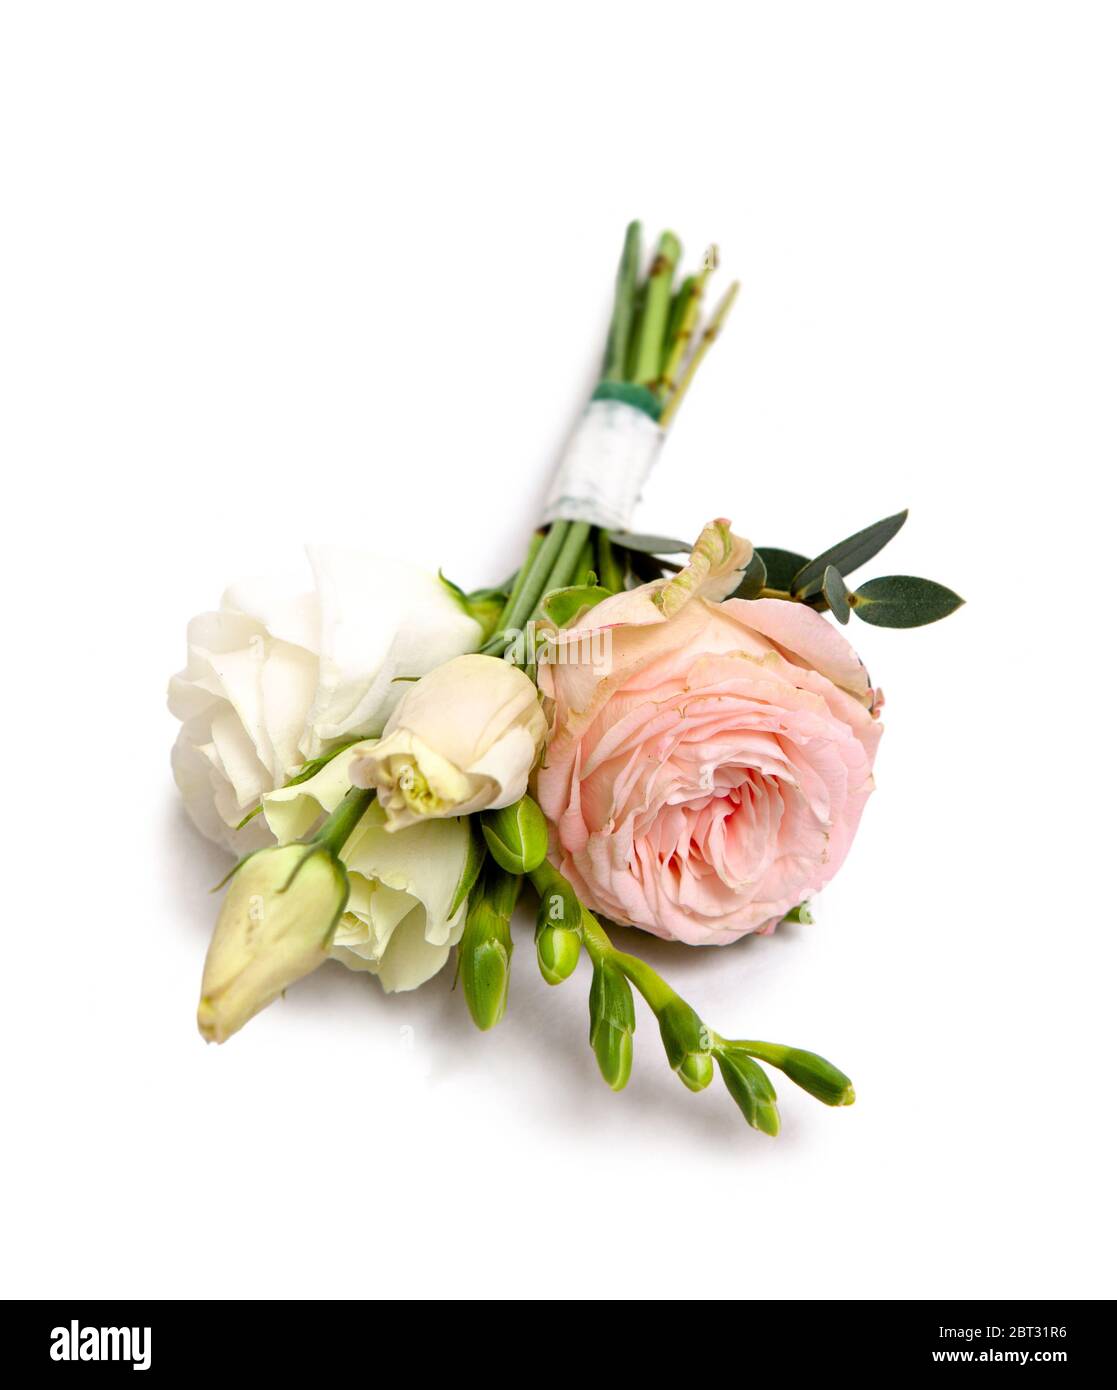 cute boutonniere of live roses Stock Photo